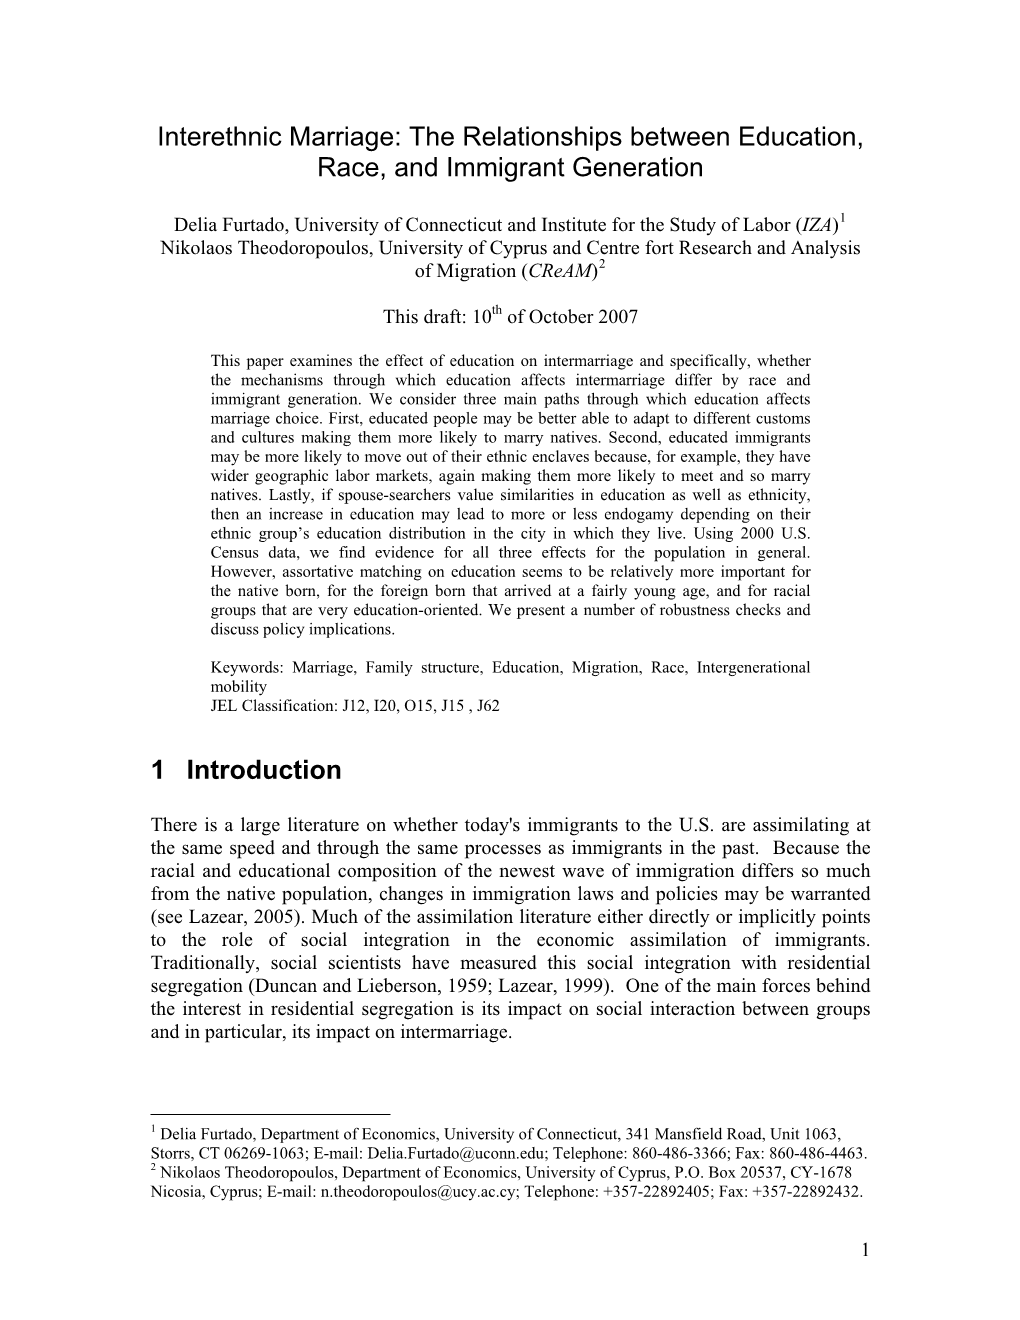 Interethnic Marriage: the Relationships Between Education, Race, and Immigrant Generation